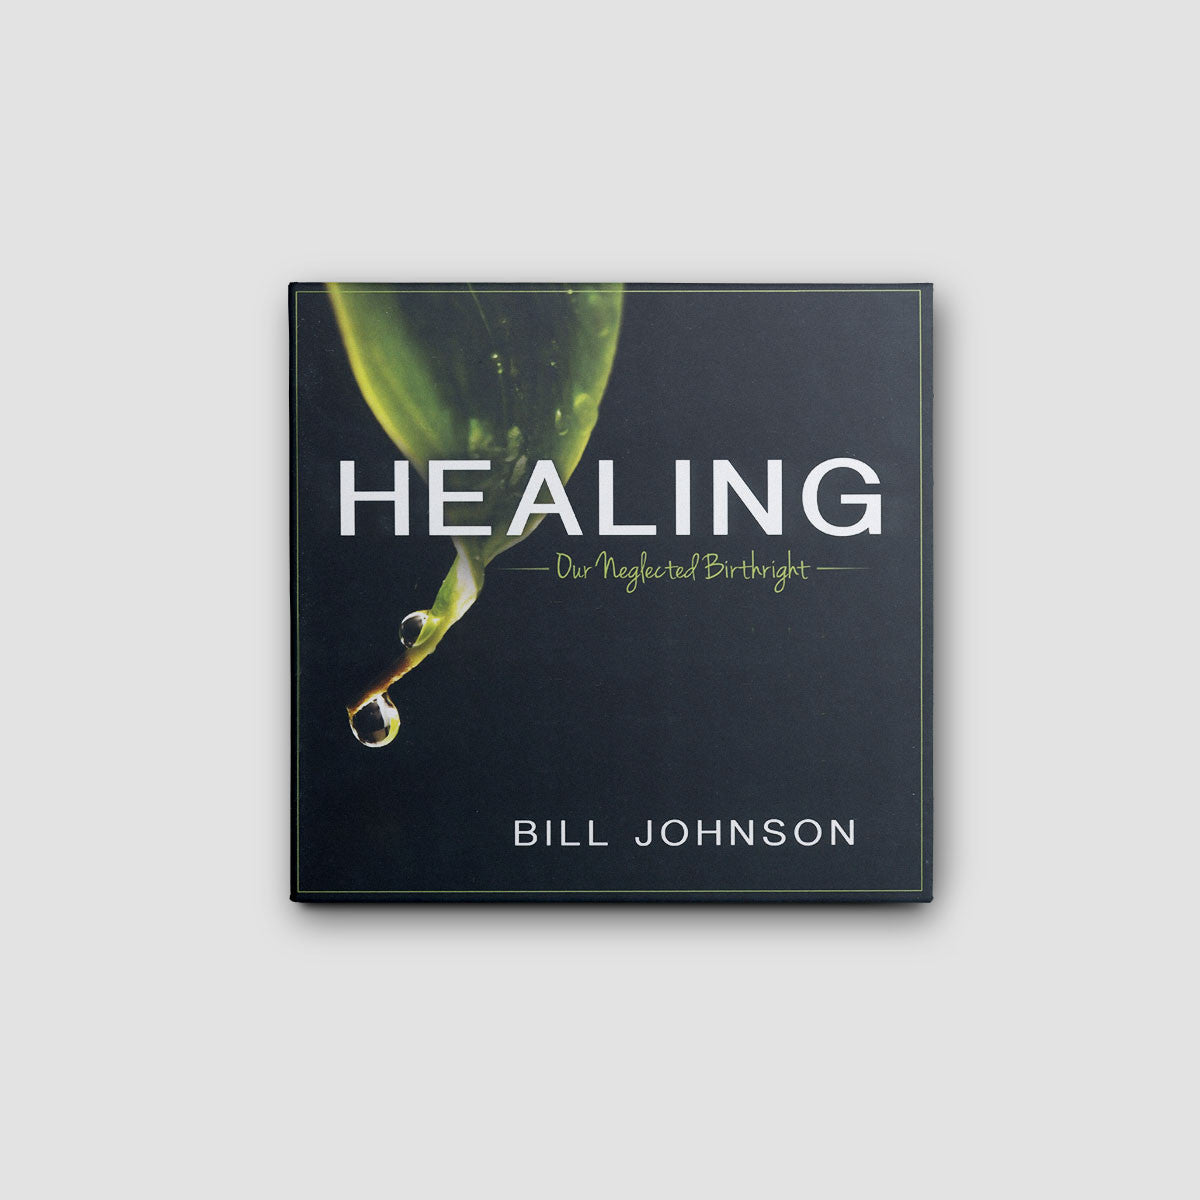 Healing: Our Neglected Birthright